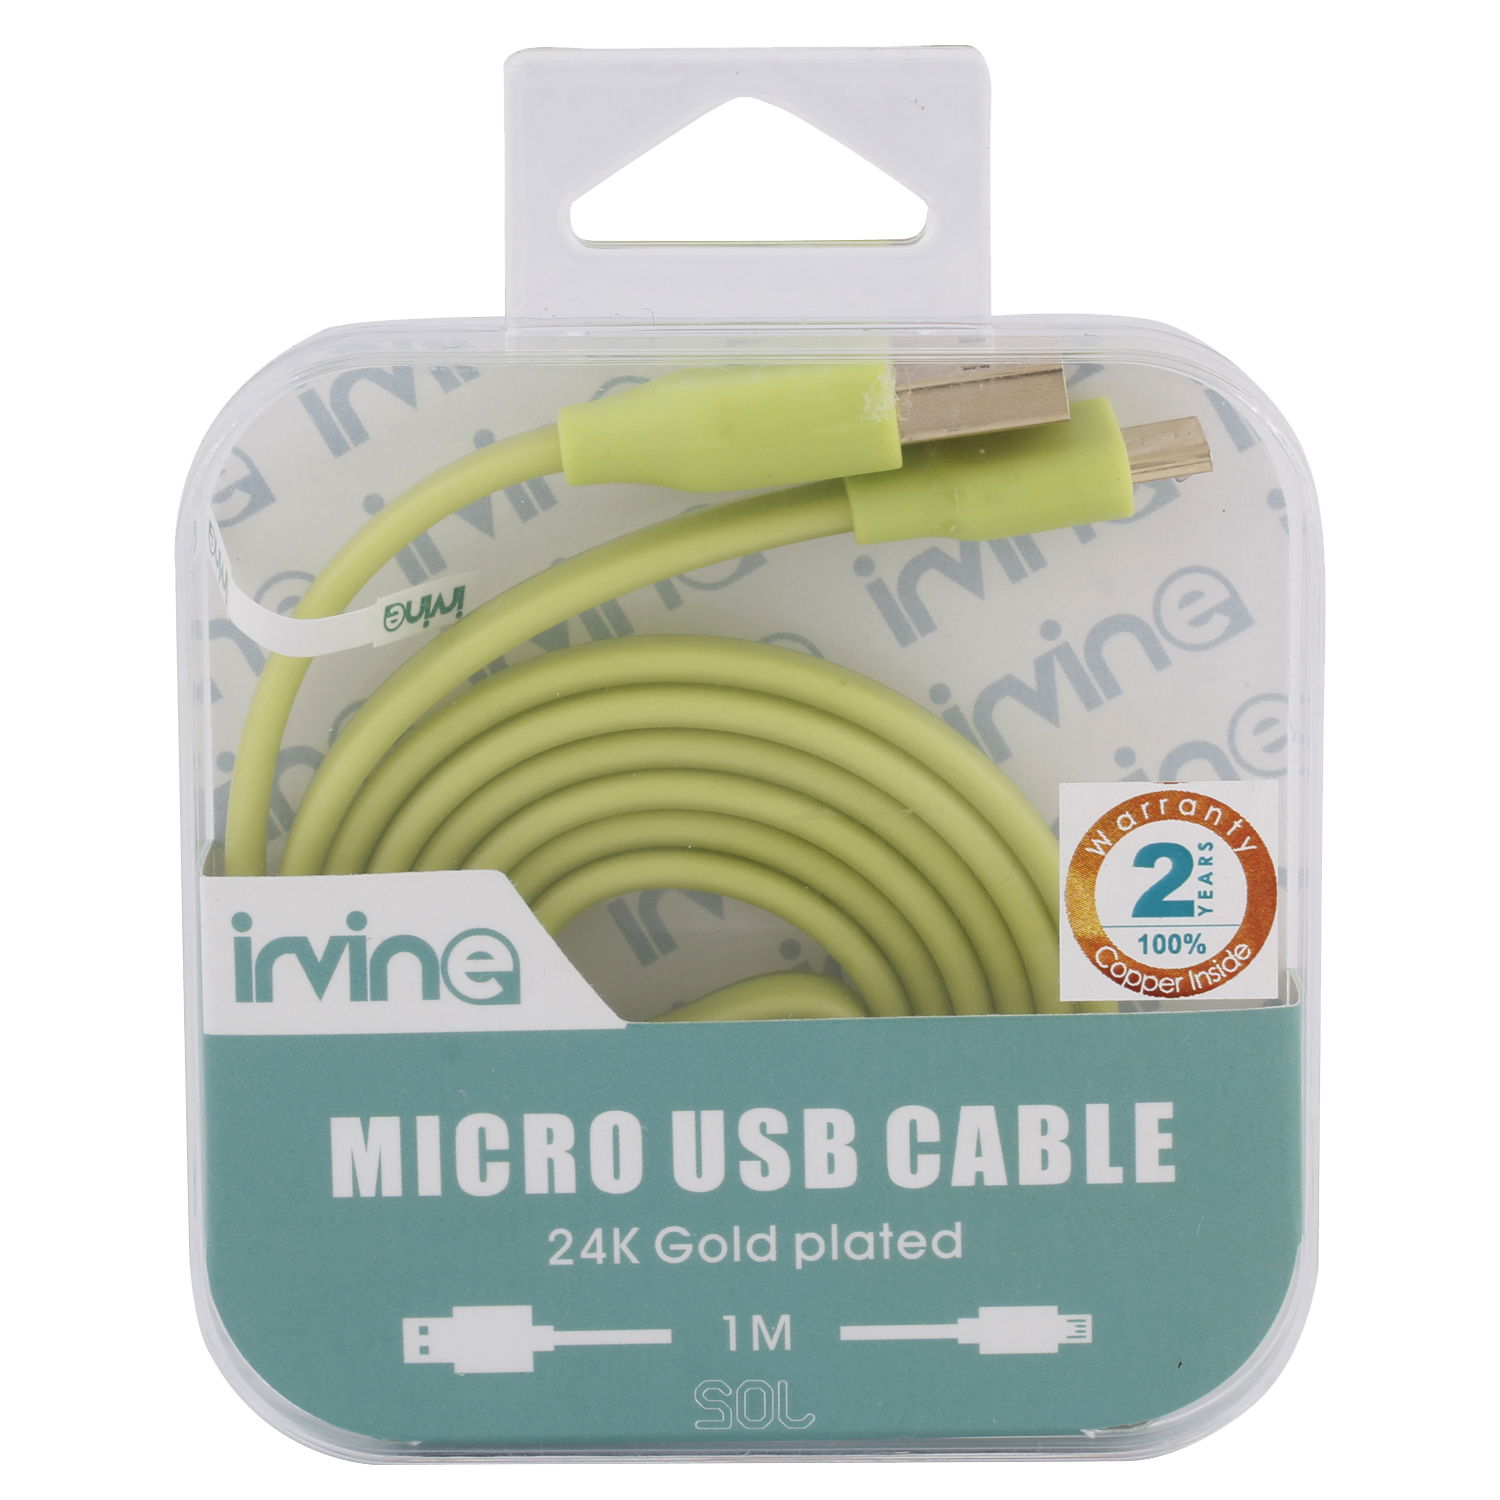 Irvine Micro USB Cable with 2 year warranty 4